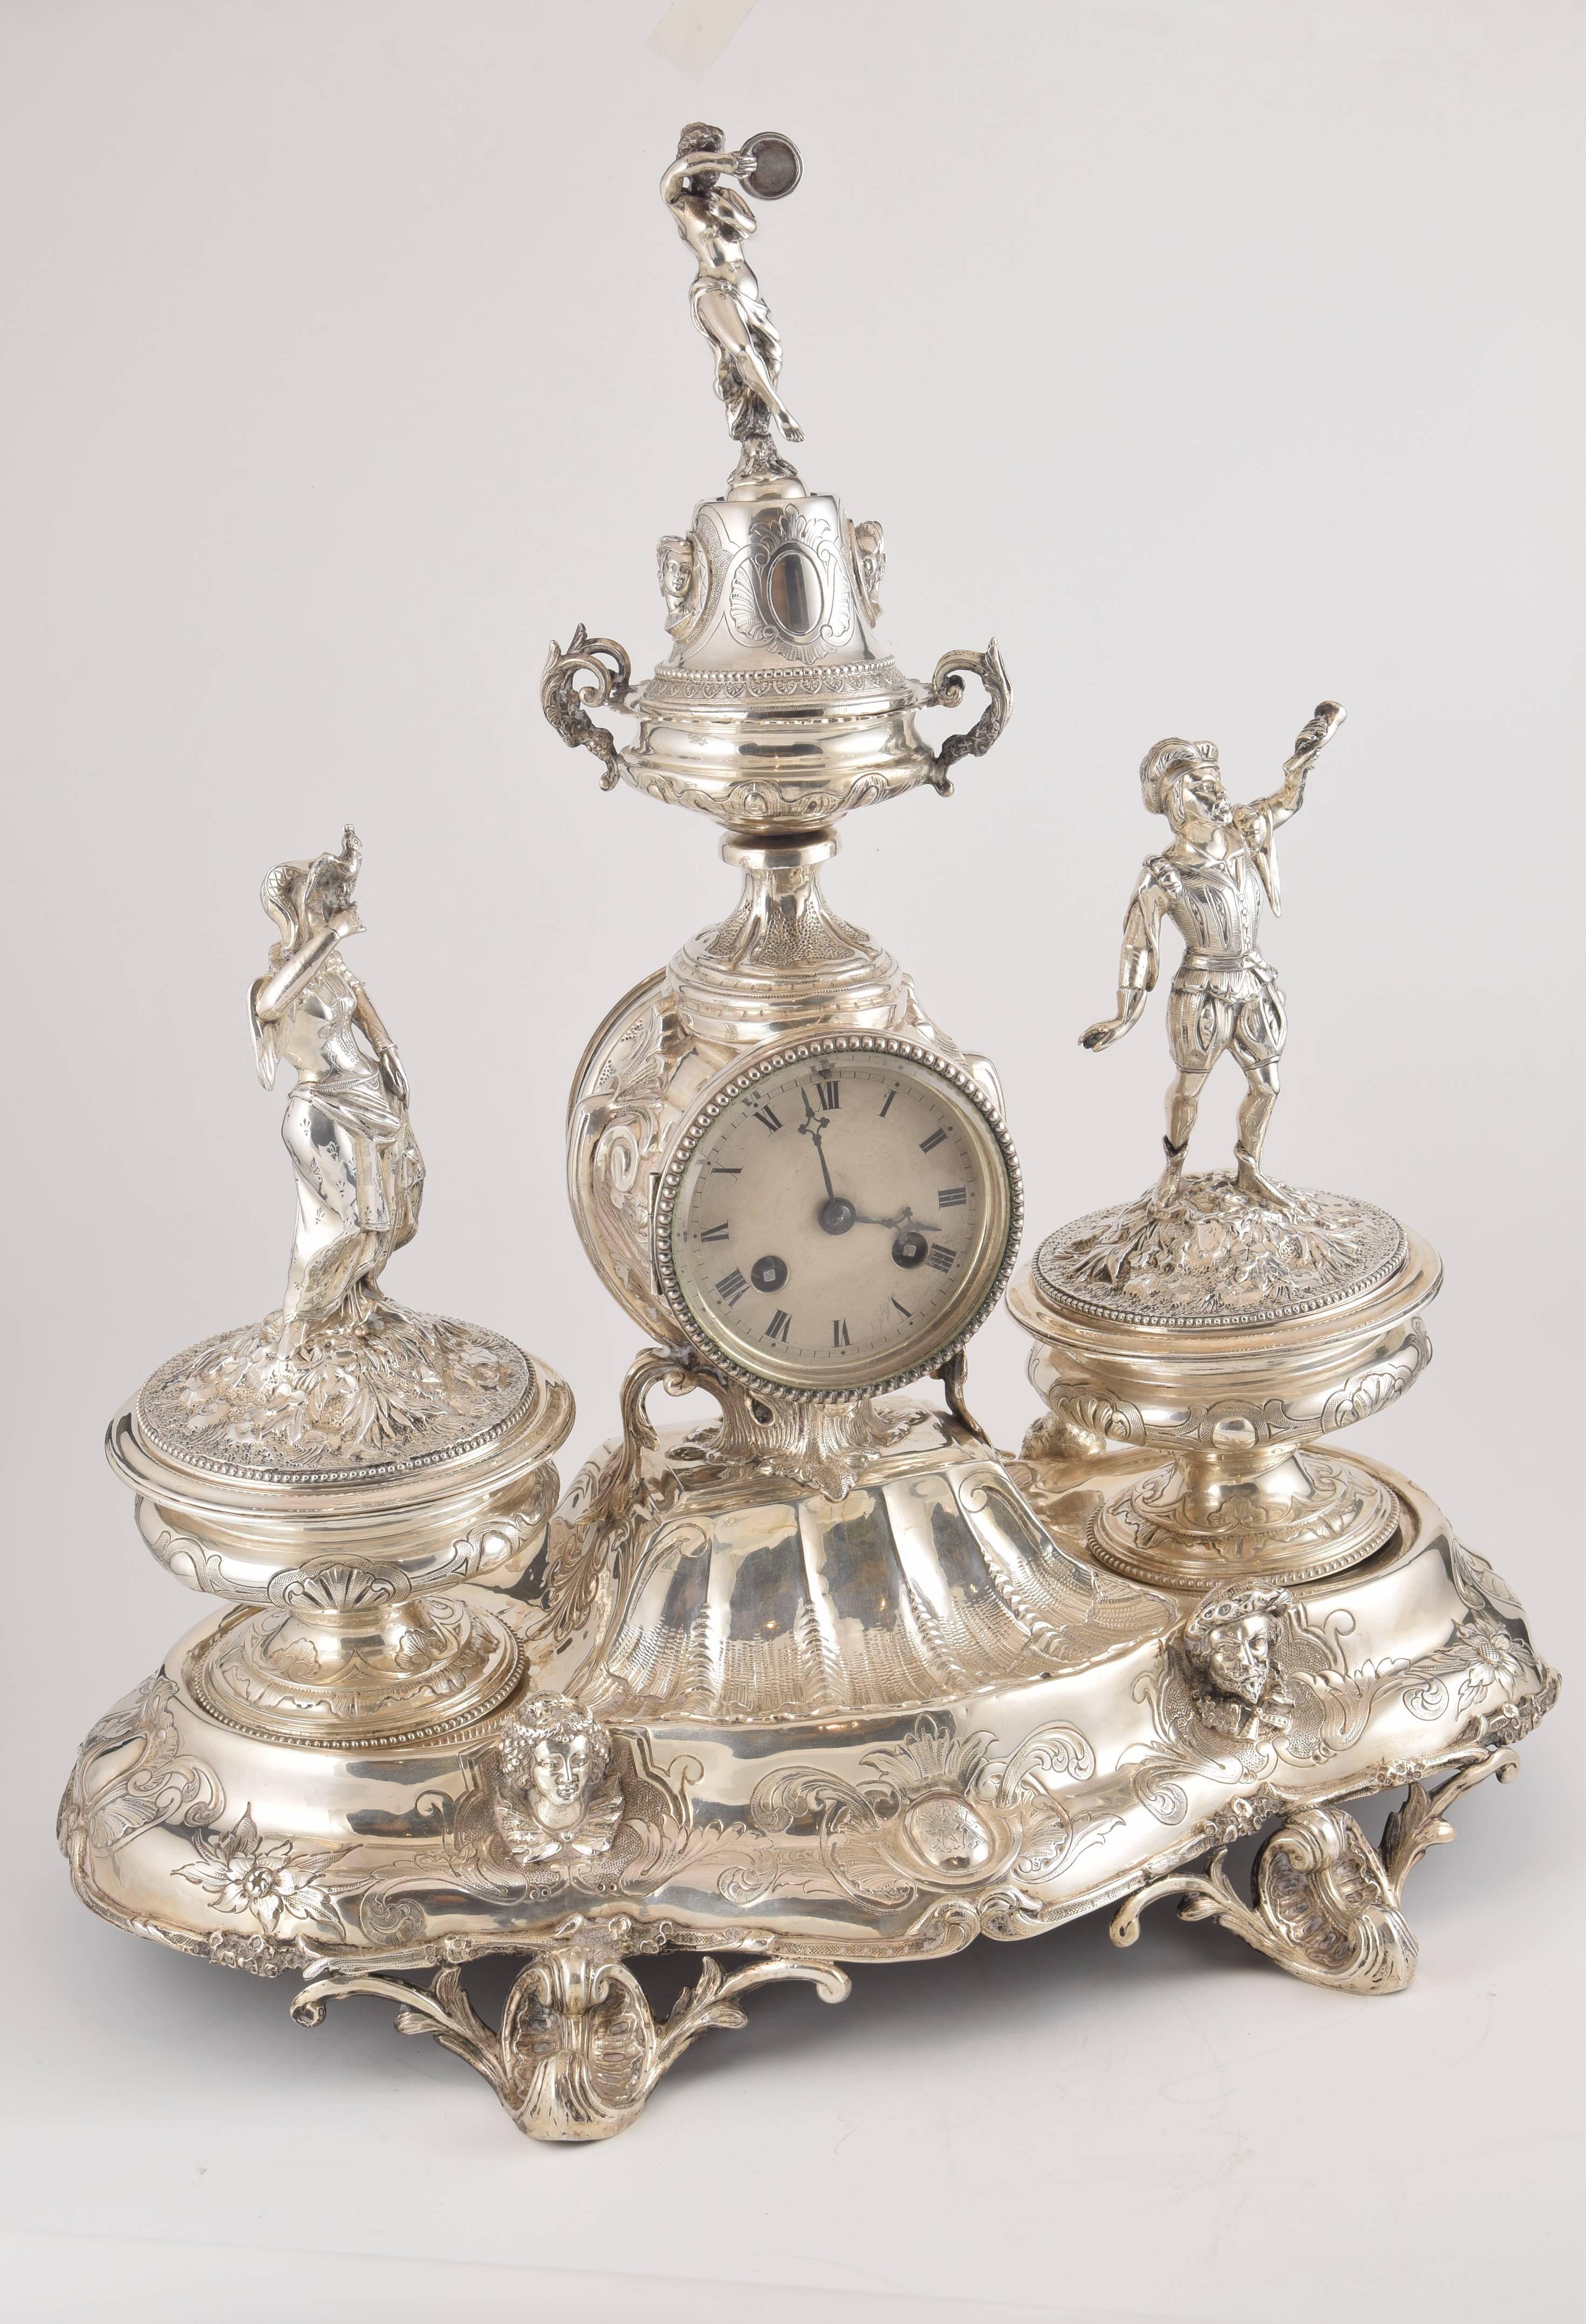 Solid silver writing set with clock. France, 19th century.
With hallmarks.
Writing set enhanced by a base slightly elevated by pieces decorated with stems and volutes with motifs that show Rococo influence. The front of this lower area, curved